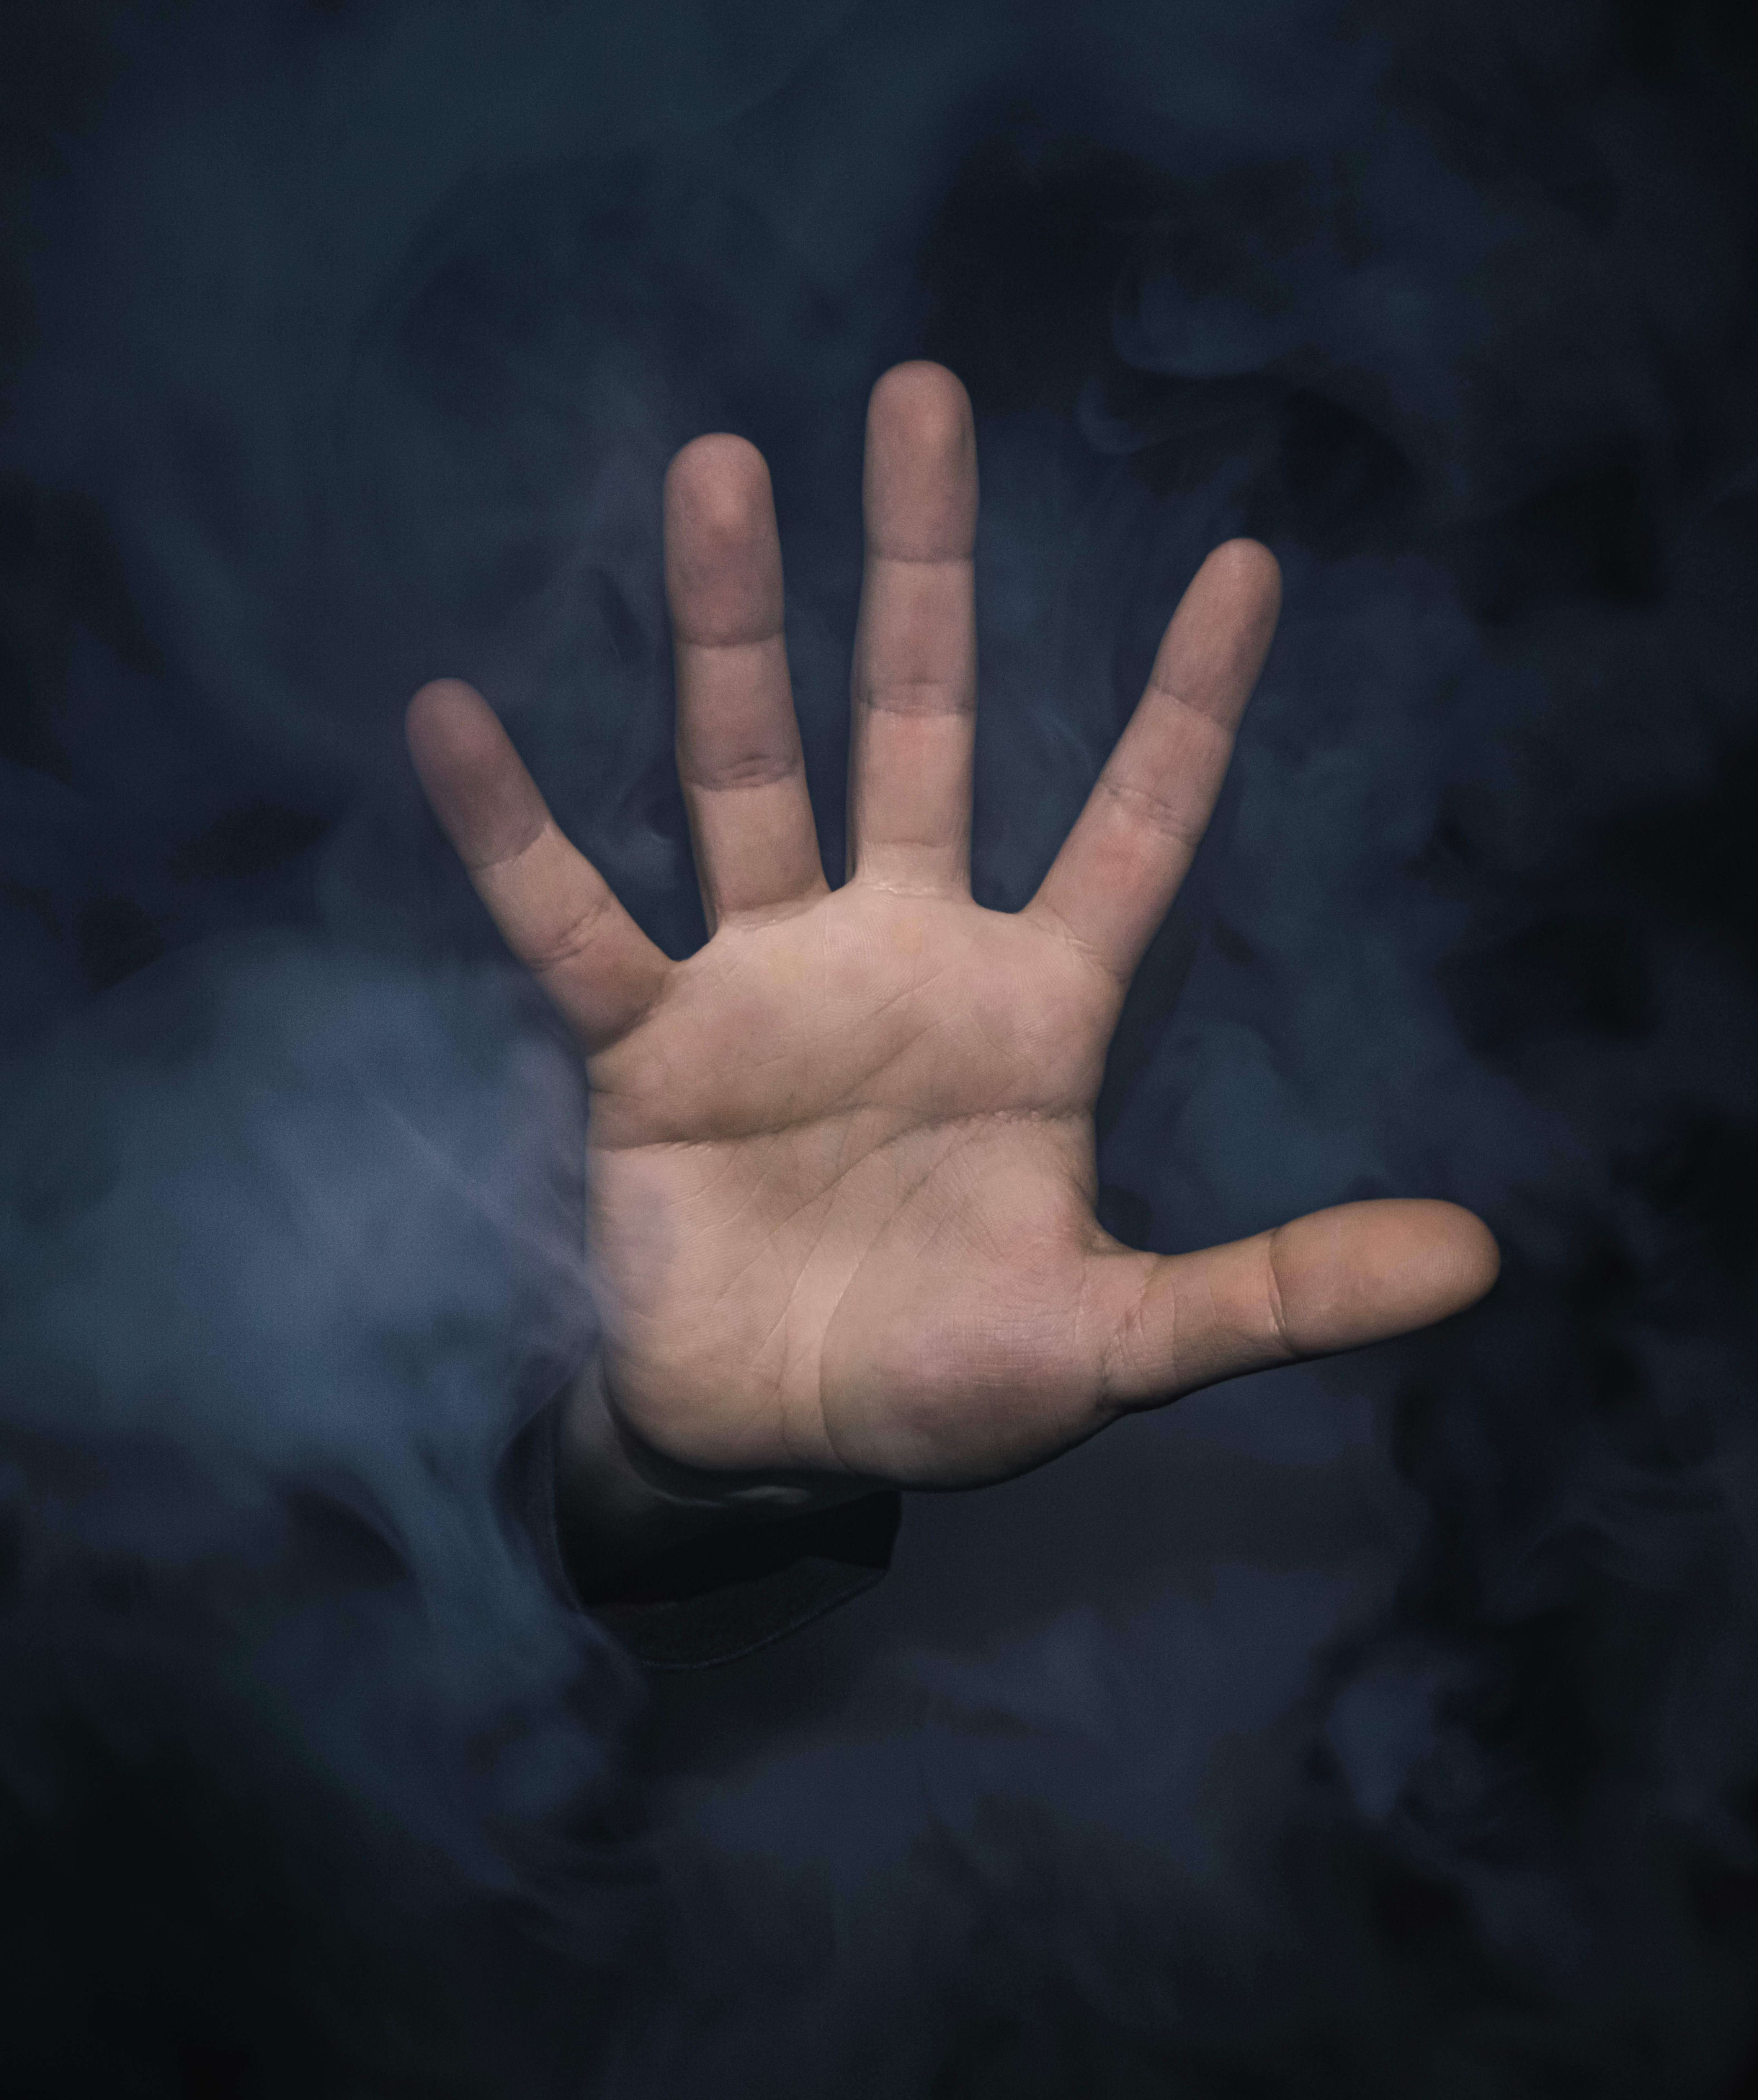 PC Wallpapers smoke, hand, miscellanea, miscellaneous, palm, fingers, gesture